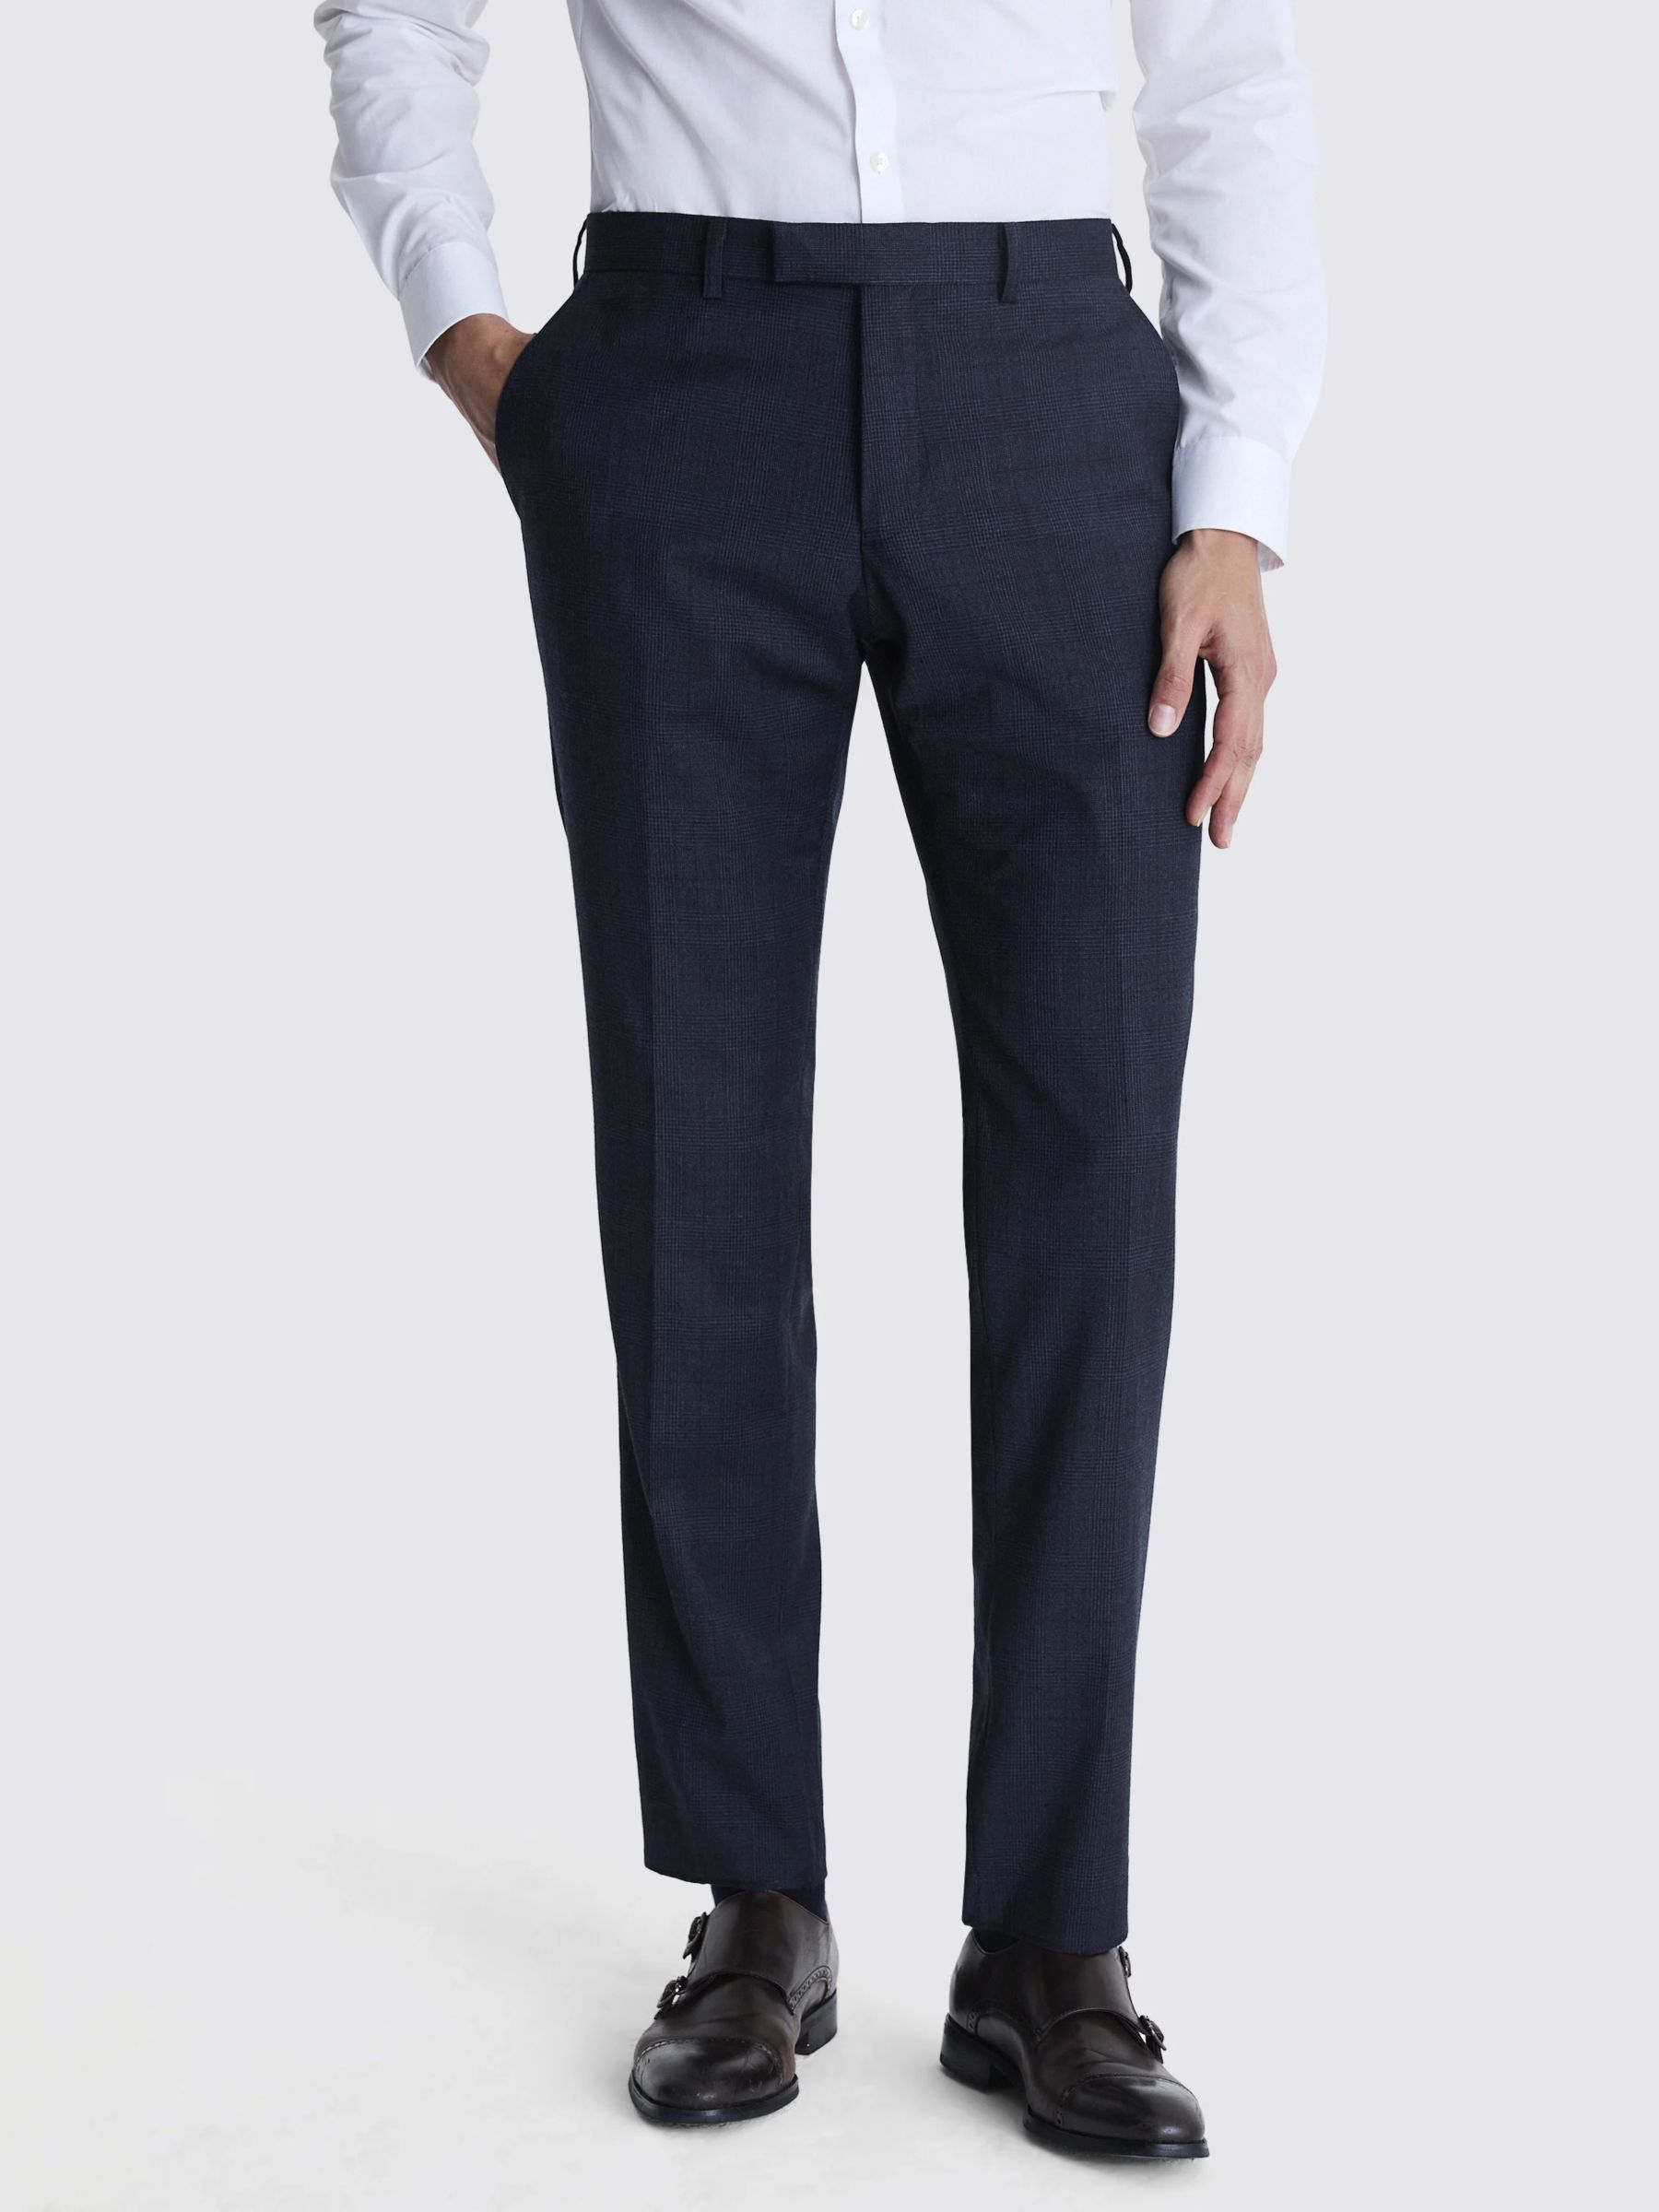 Moss Tailored Fit Wool Blend Check Performance Suit Trousers, Navy, 32S